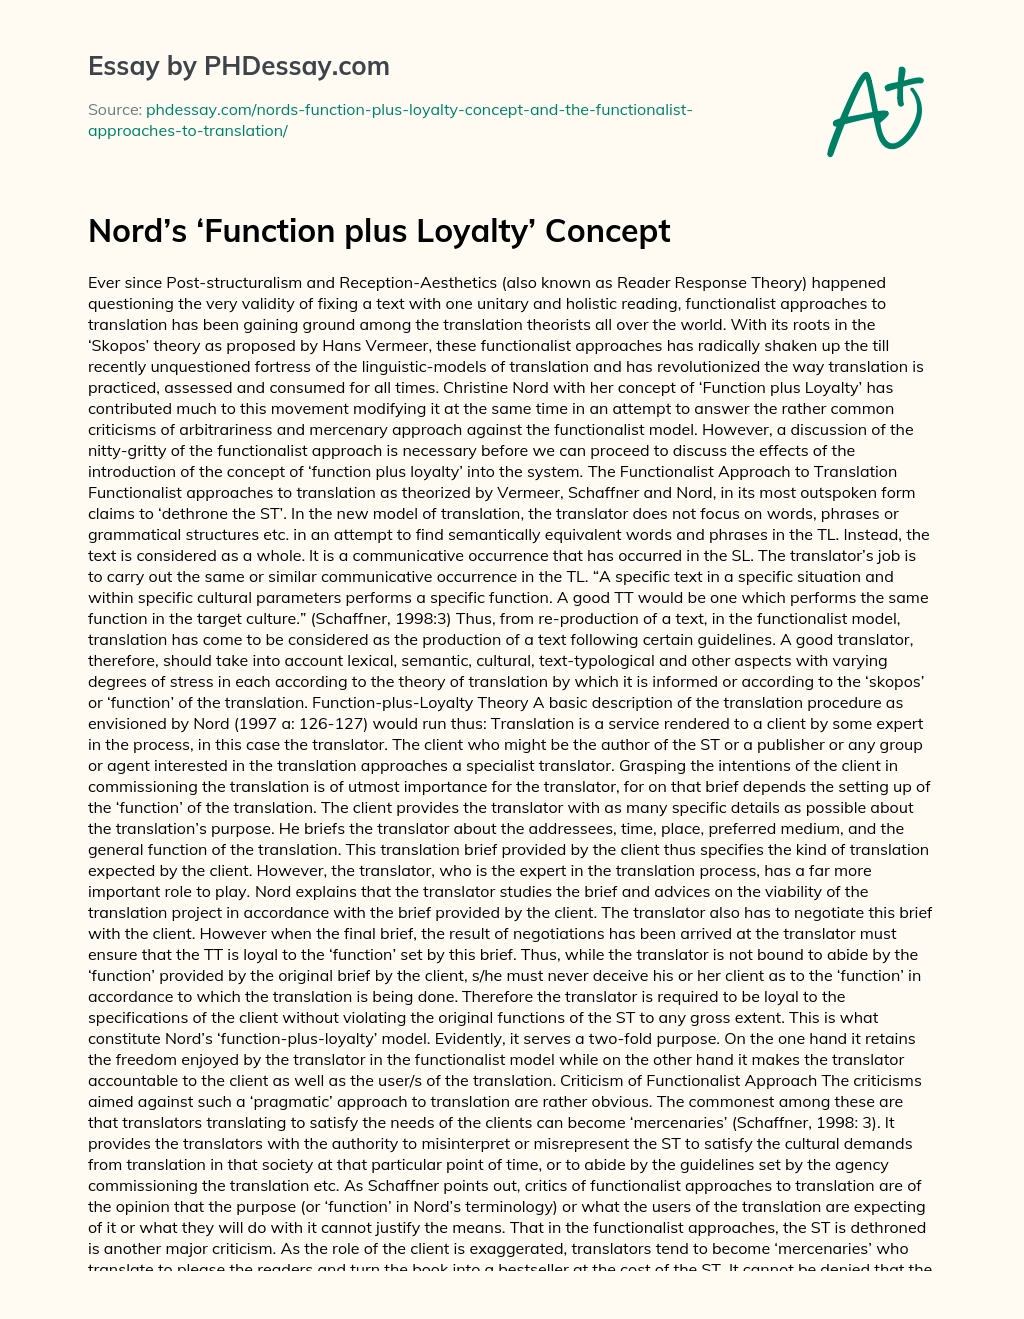 Nord’s ‘Function Plus Loyalty’ Concept essay